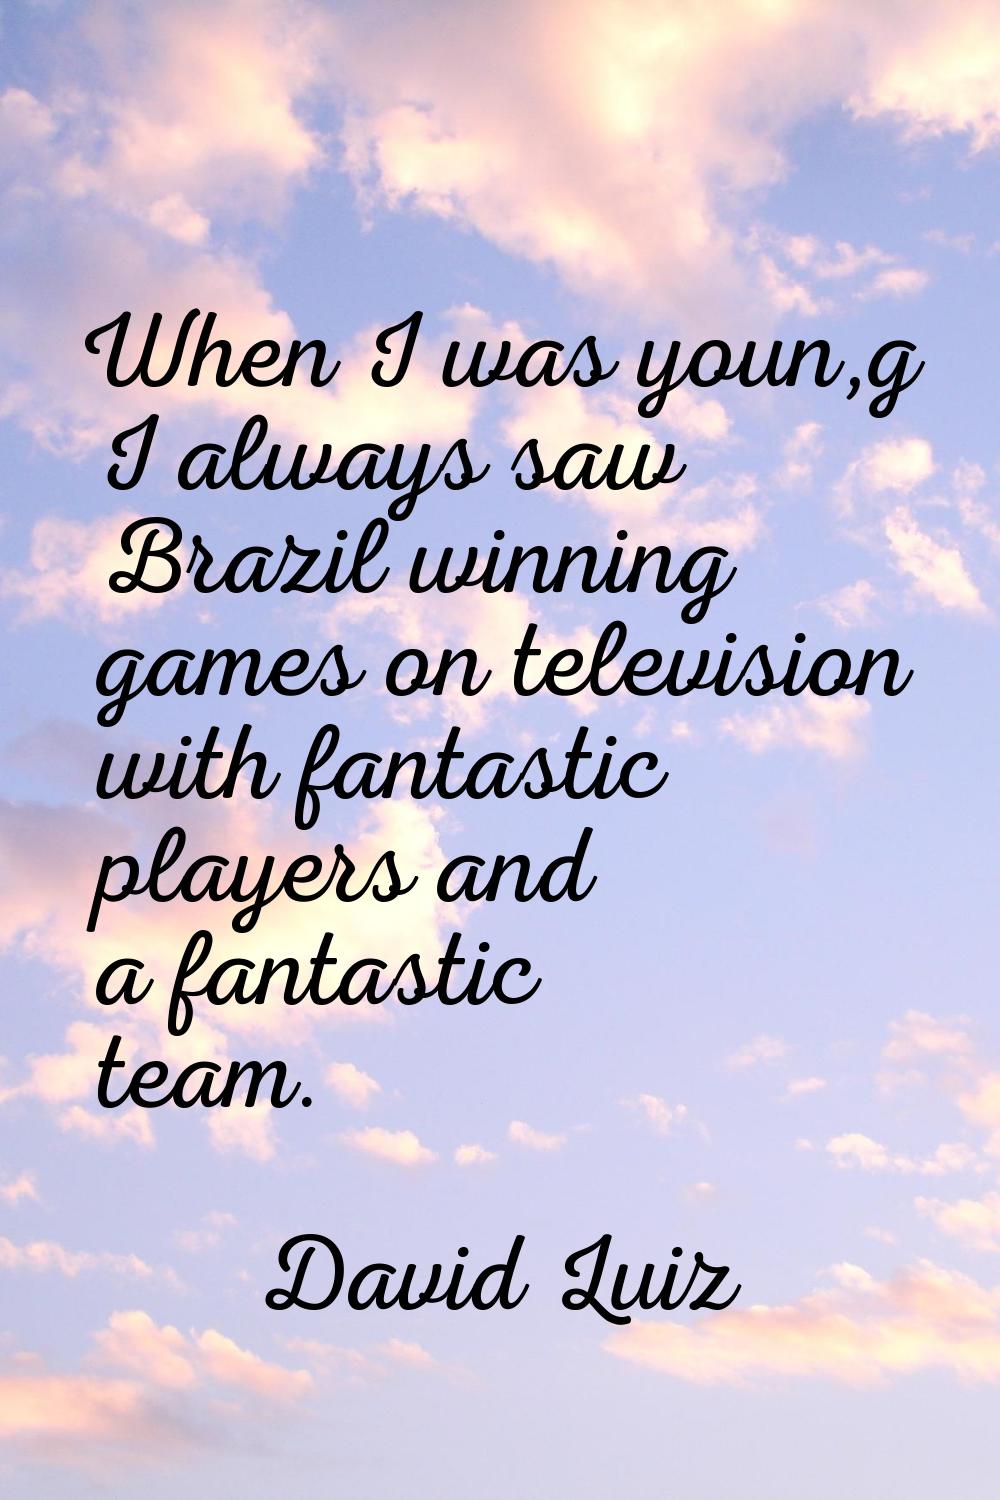 When I was youn,g I always saw Brazil winning games on television with fantastic players and a fant